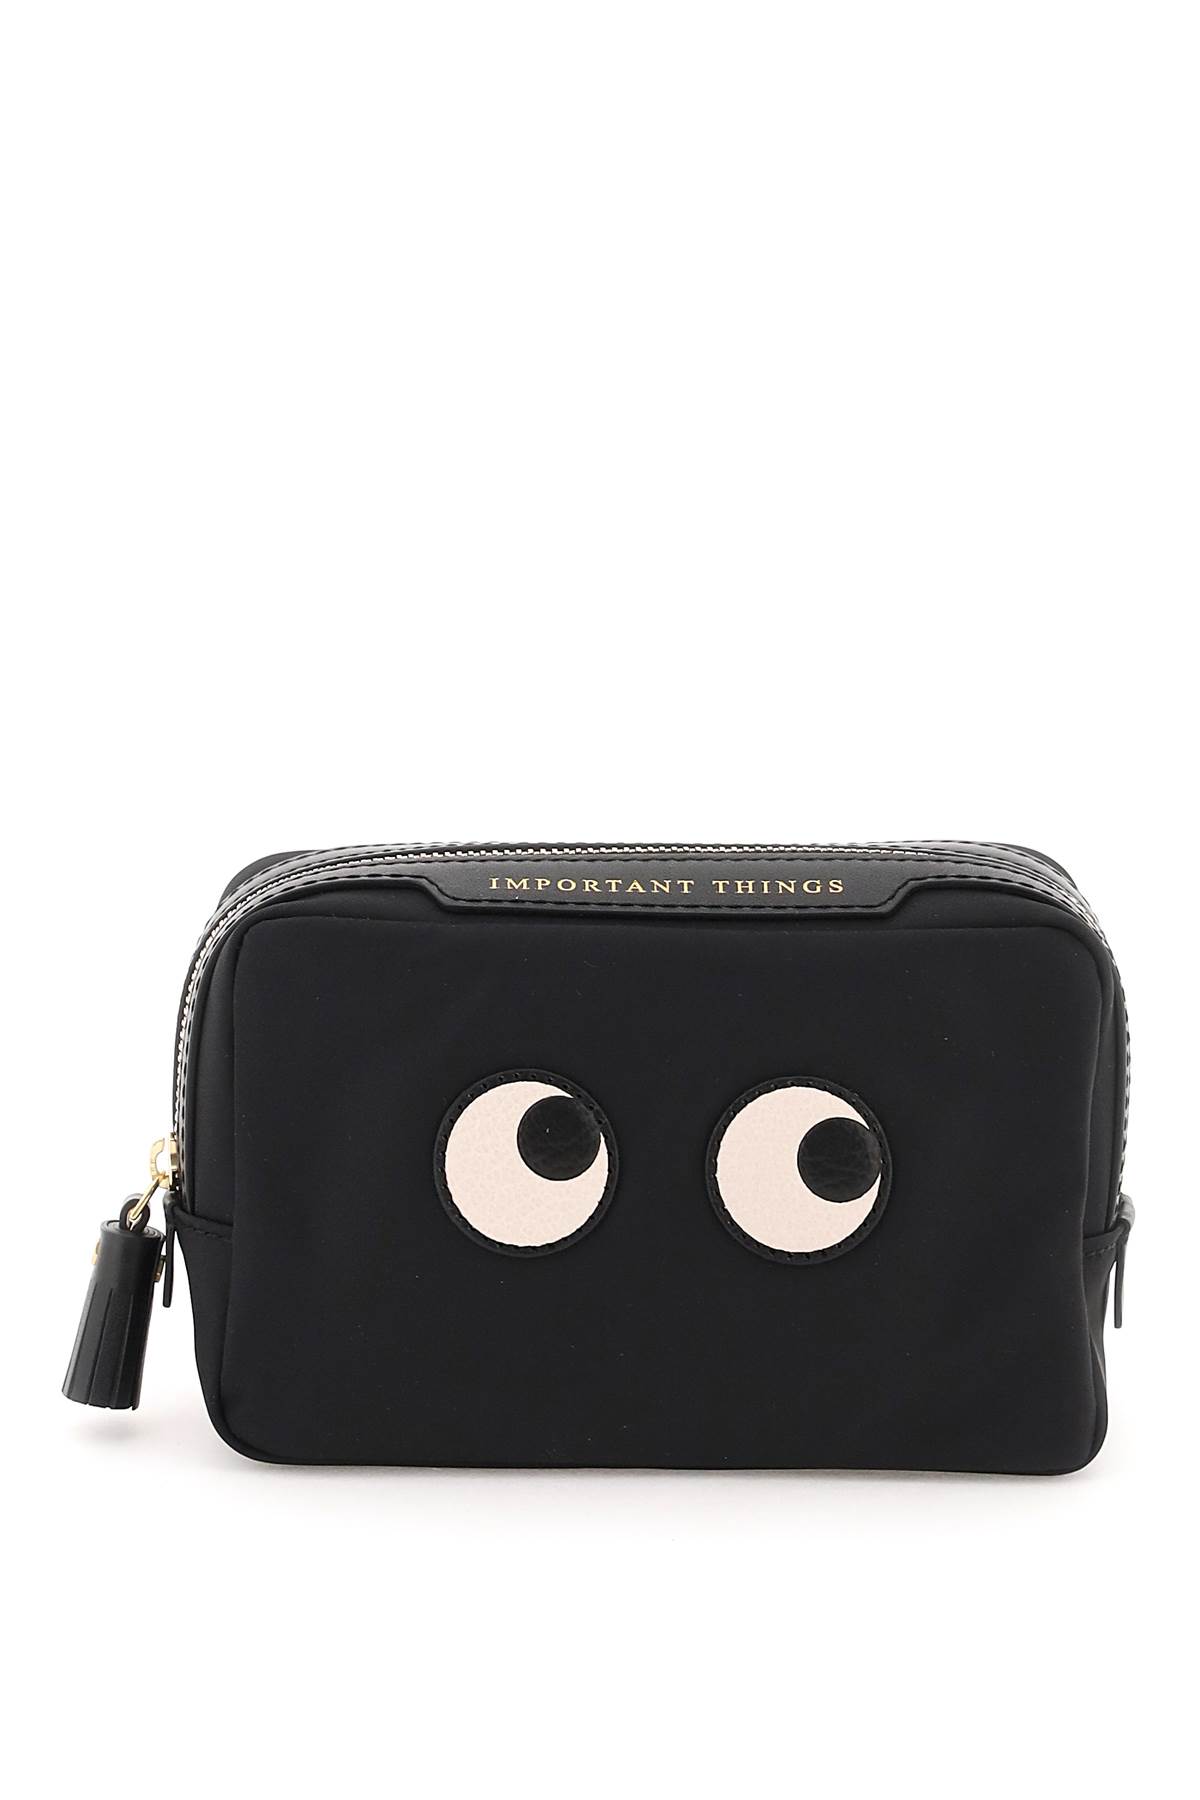 Anya Hindmarch Important Things Eyes Nylon Pouch In Black (black)